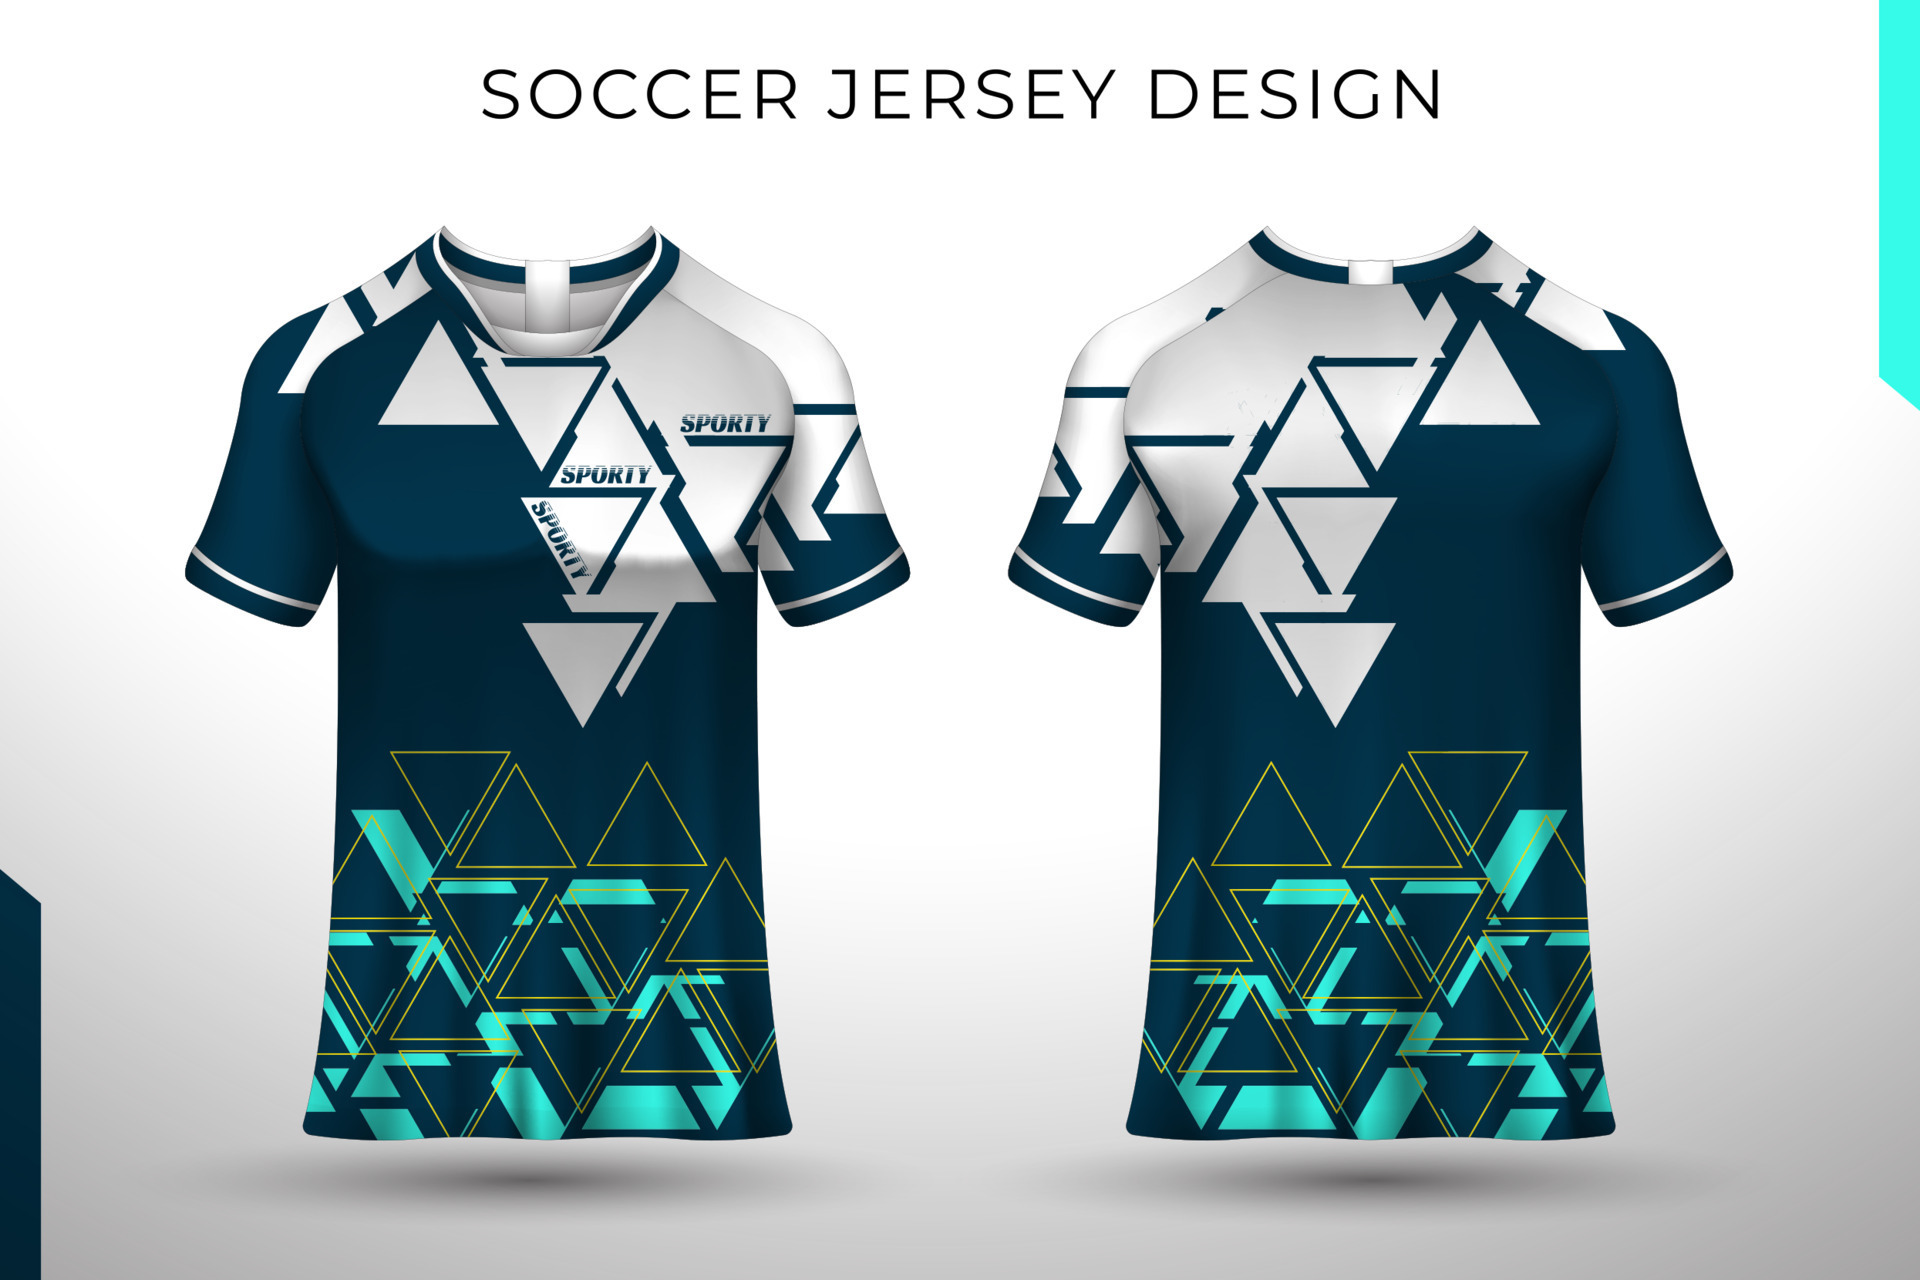 https://static.vecteezy.com/system/resources/previews/009/484/288/original/front-back-tshirt-design-sports-design-for-football-racing-cycling-gaming-jersey-free-vector.jpg